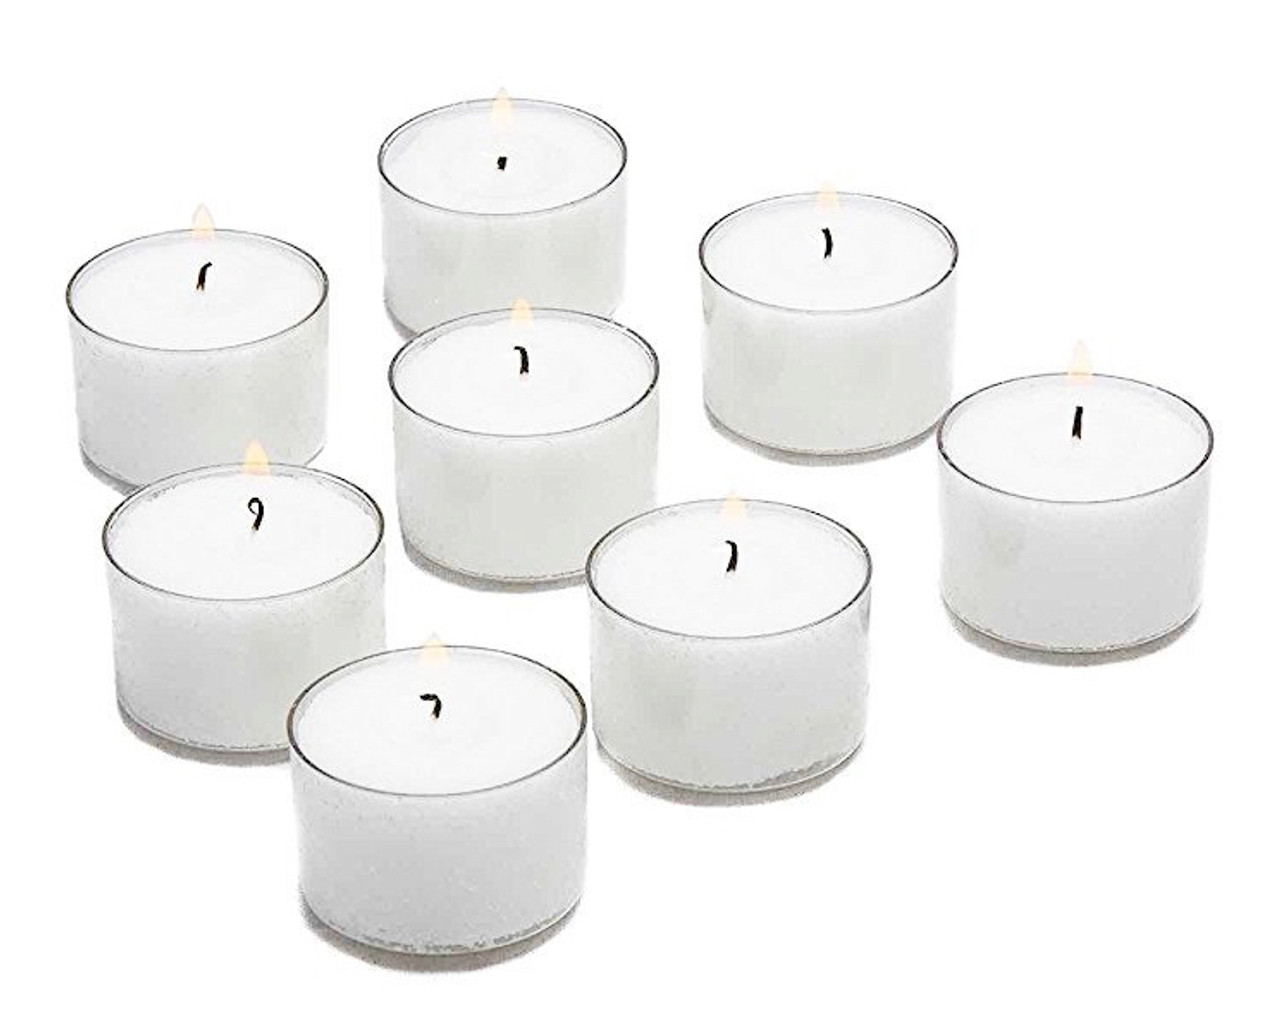 Camping Supplies - White Candles - Set of 6 Long-Burn Emergency Candles